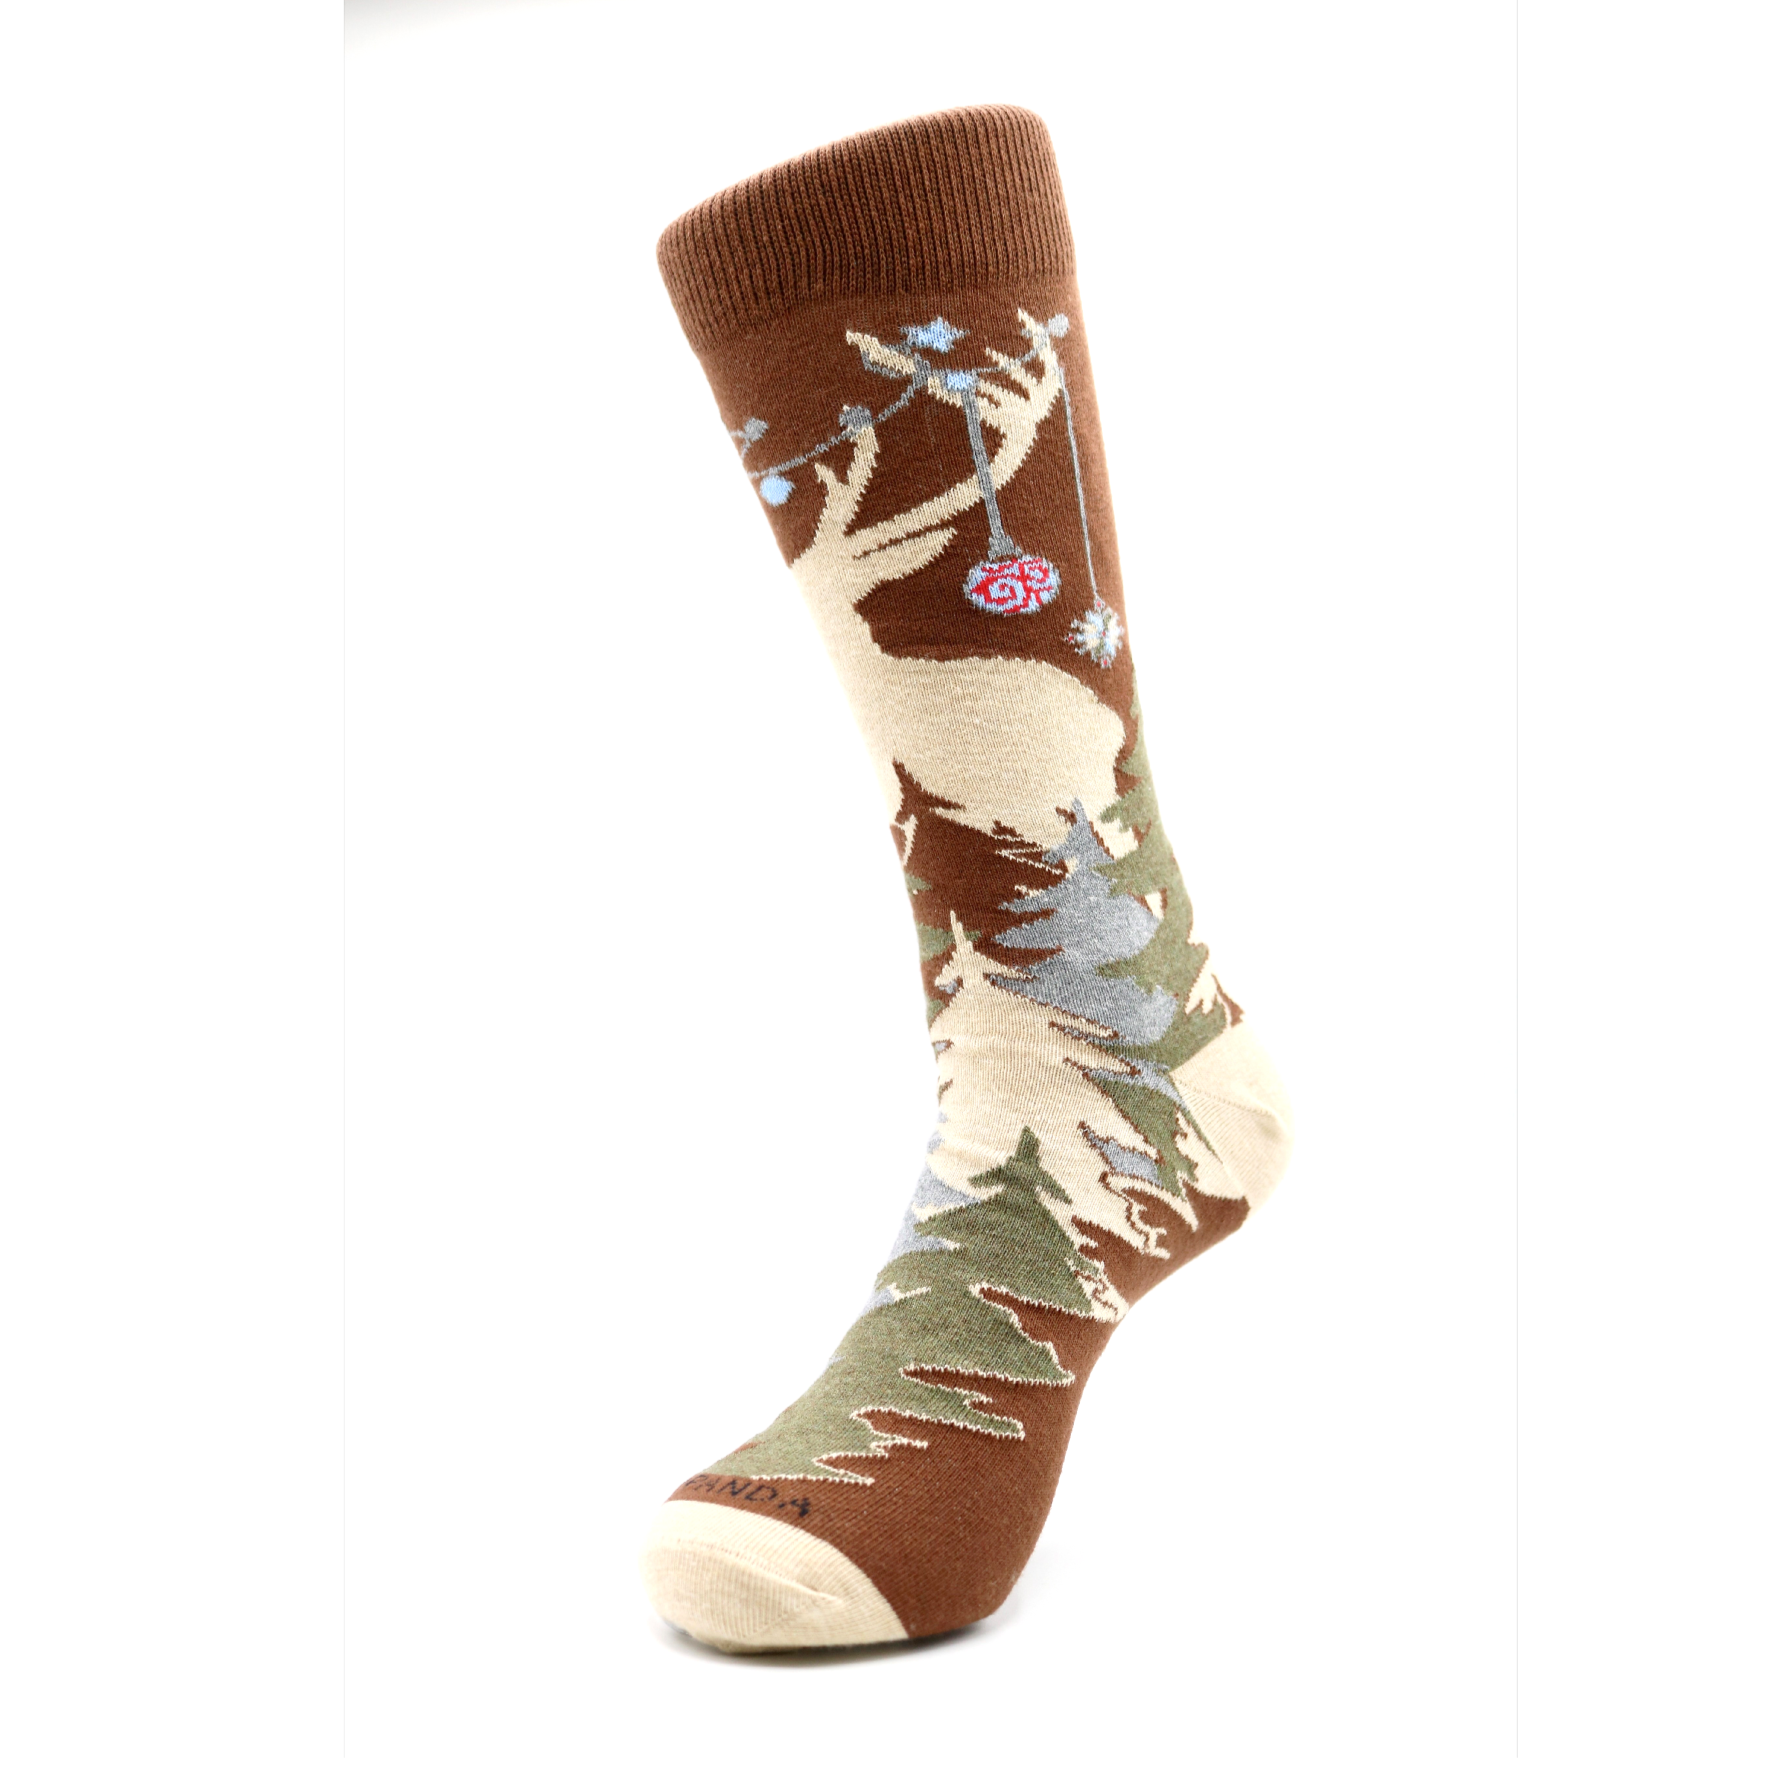 Reindeer in the Mountains Holiday Socks (Adult Large) from the Sock Panda